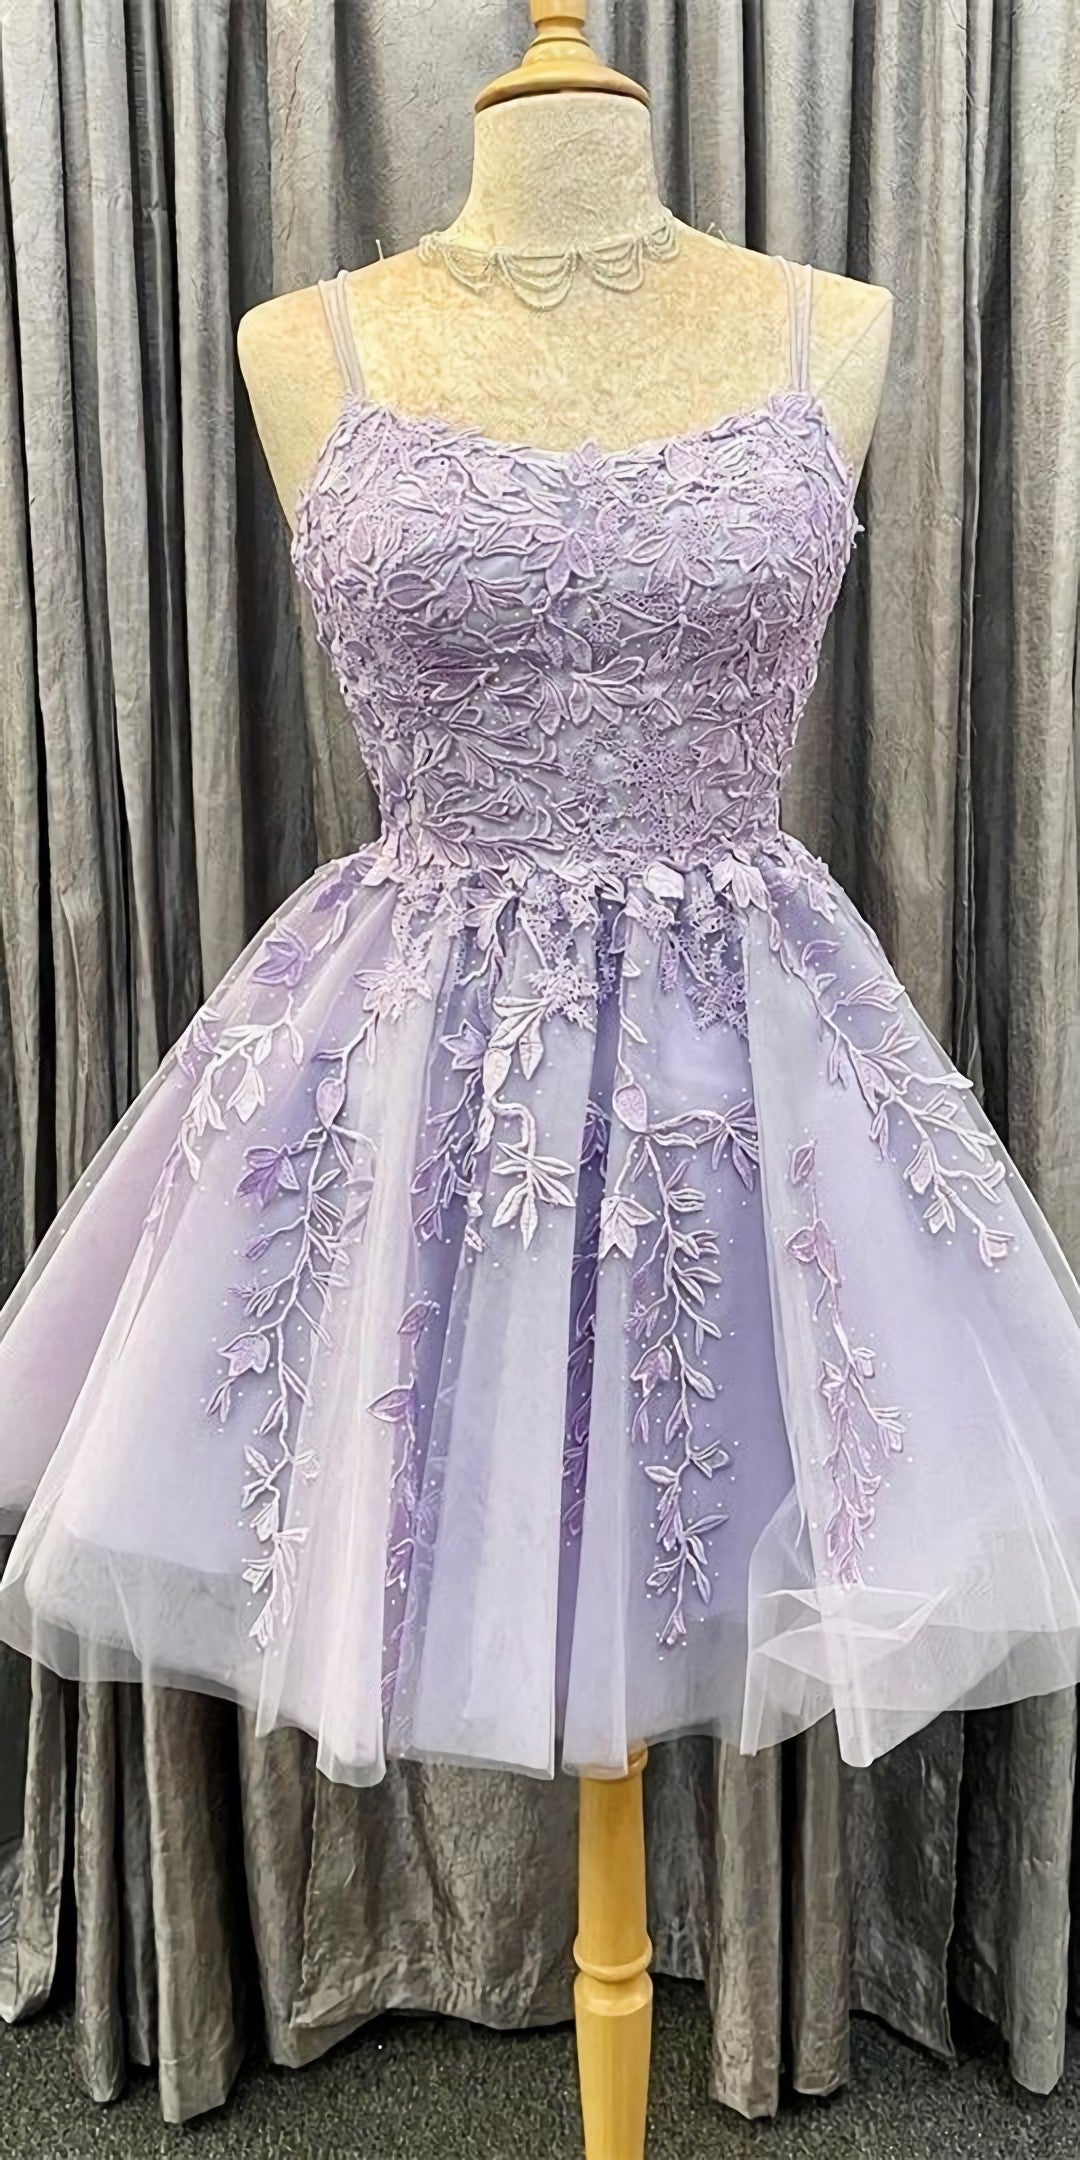 Princess Short Lavender A Line Lace Appliqued Corset Homecoming Dress, Party Dress Outfits, Prom Dresses With Short